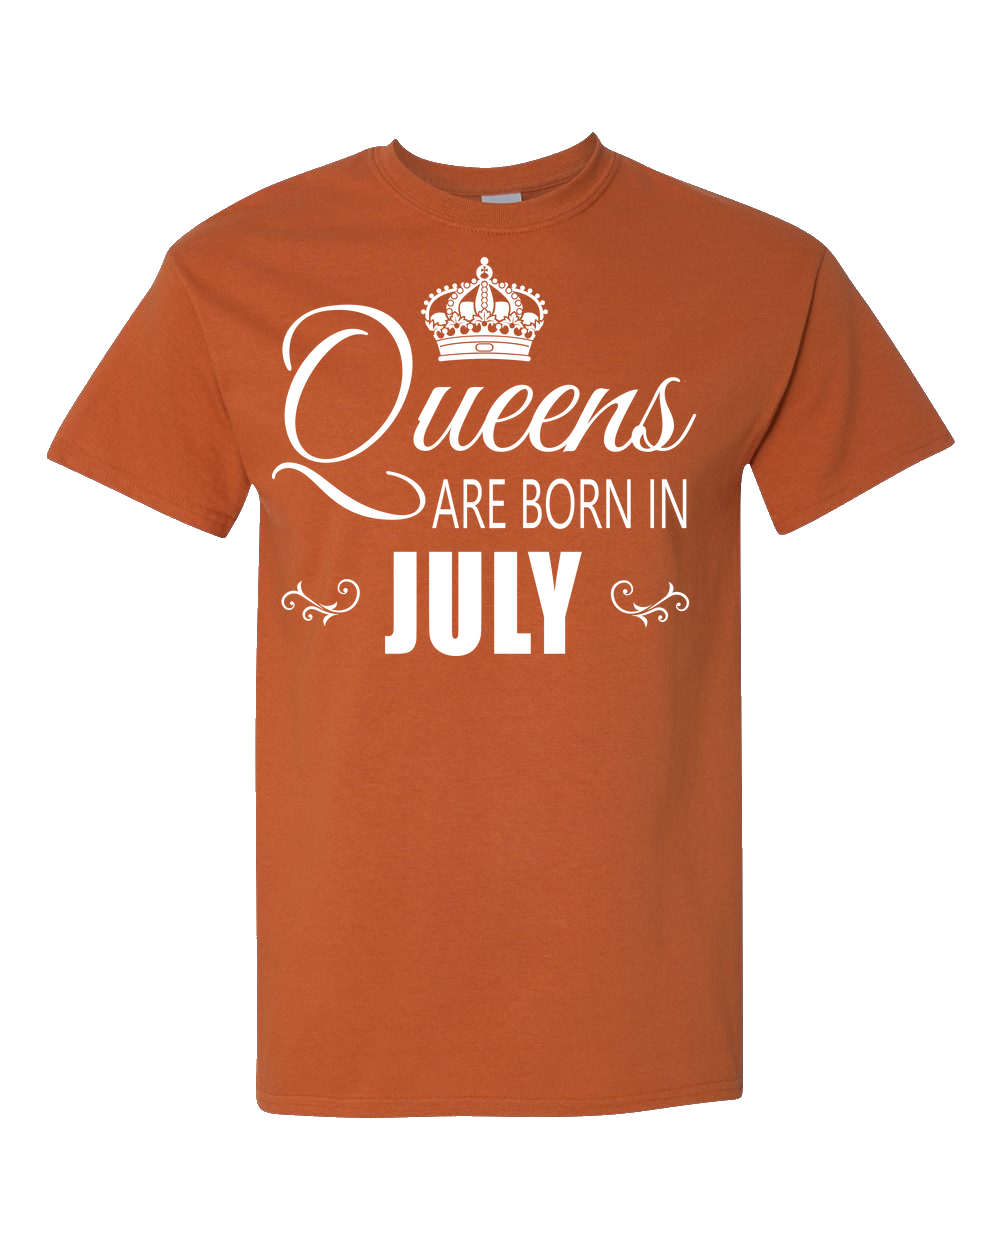 Queens are born in July _T-Shirt_840 - JaZazzy 